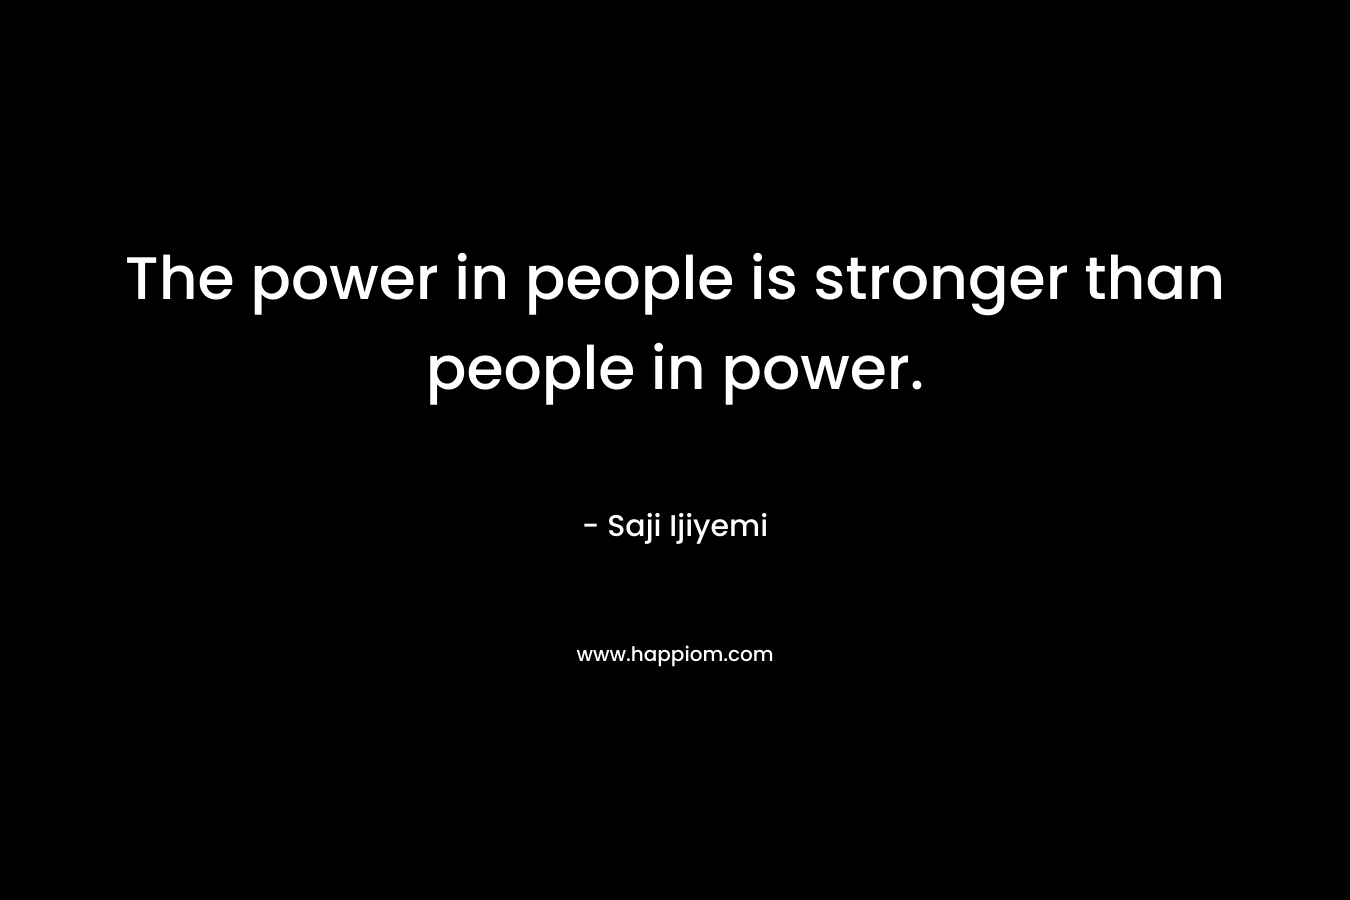 The power in people is stronger than people in power.